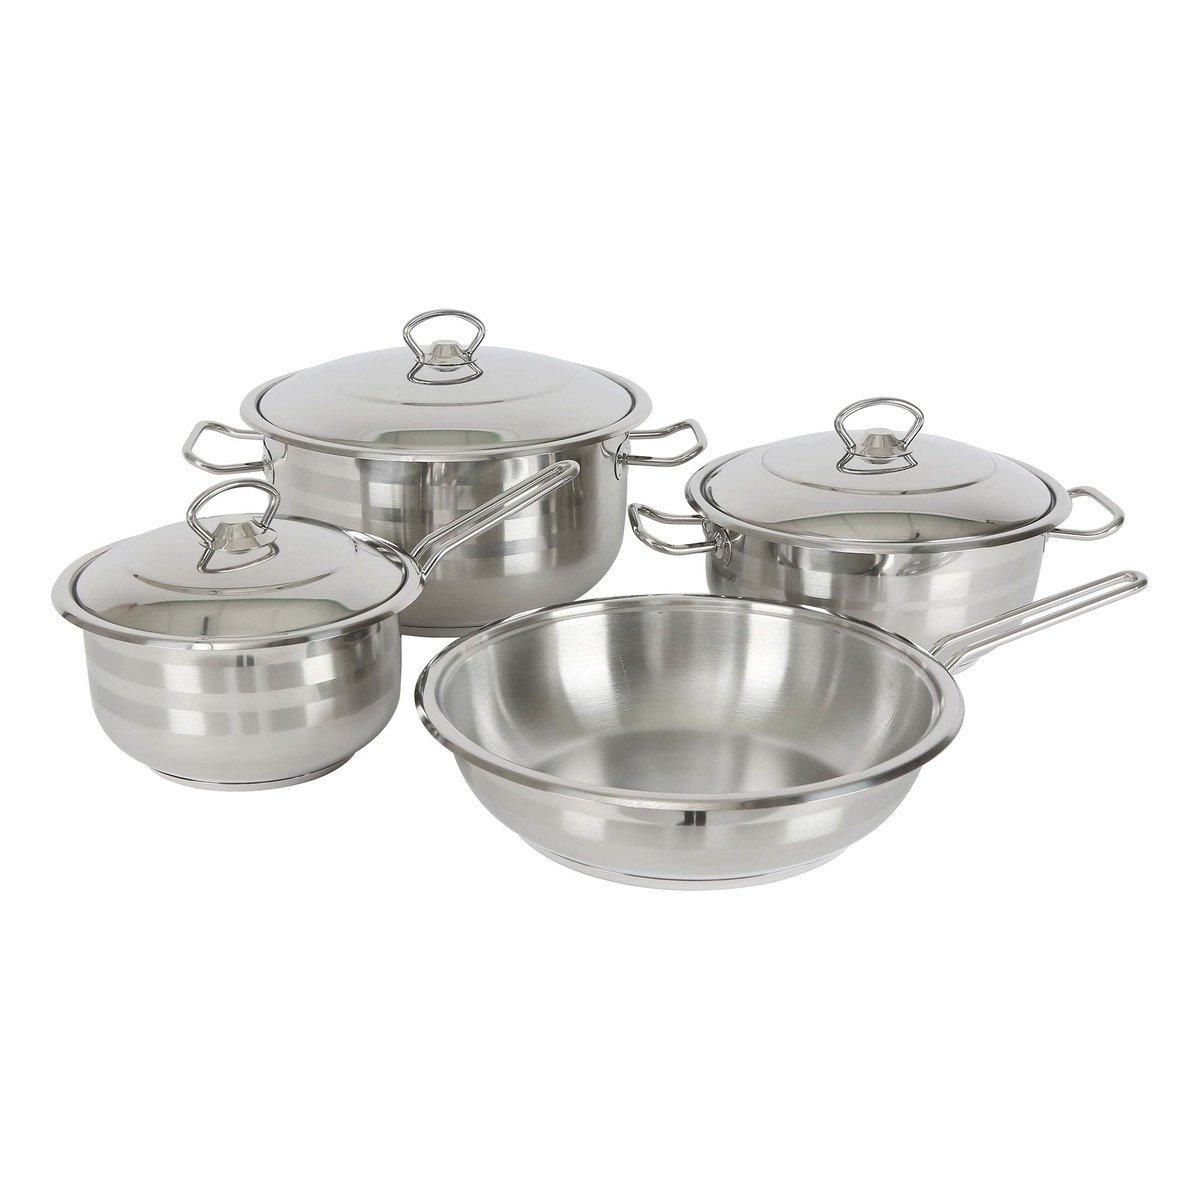 Royal Silver Stainless Steel Cookware Set 7pcs Turkey